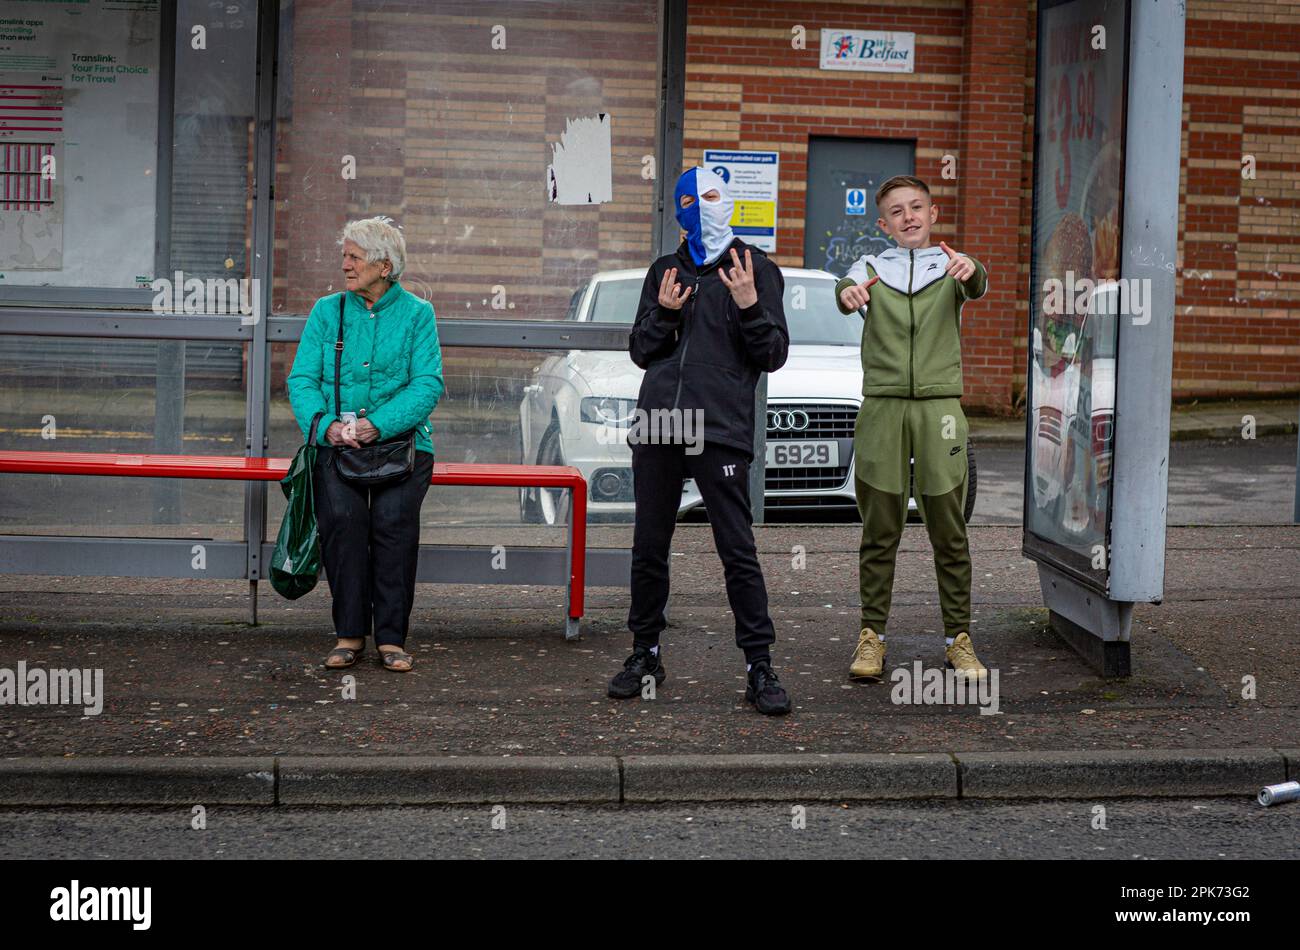 Young boy wearing a balaclava to hide his face at a bus stop in Shankill Road, Belfast, County Antrim, Northern Ireland, UK. Stock Photo